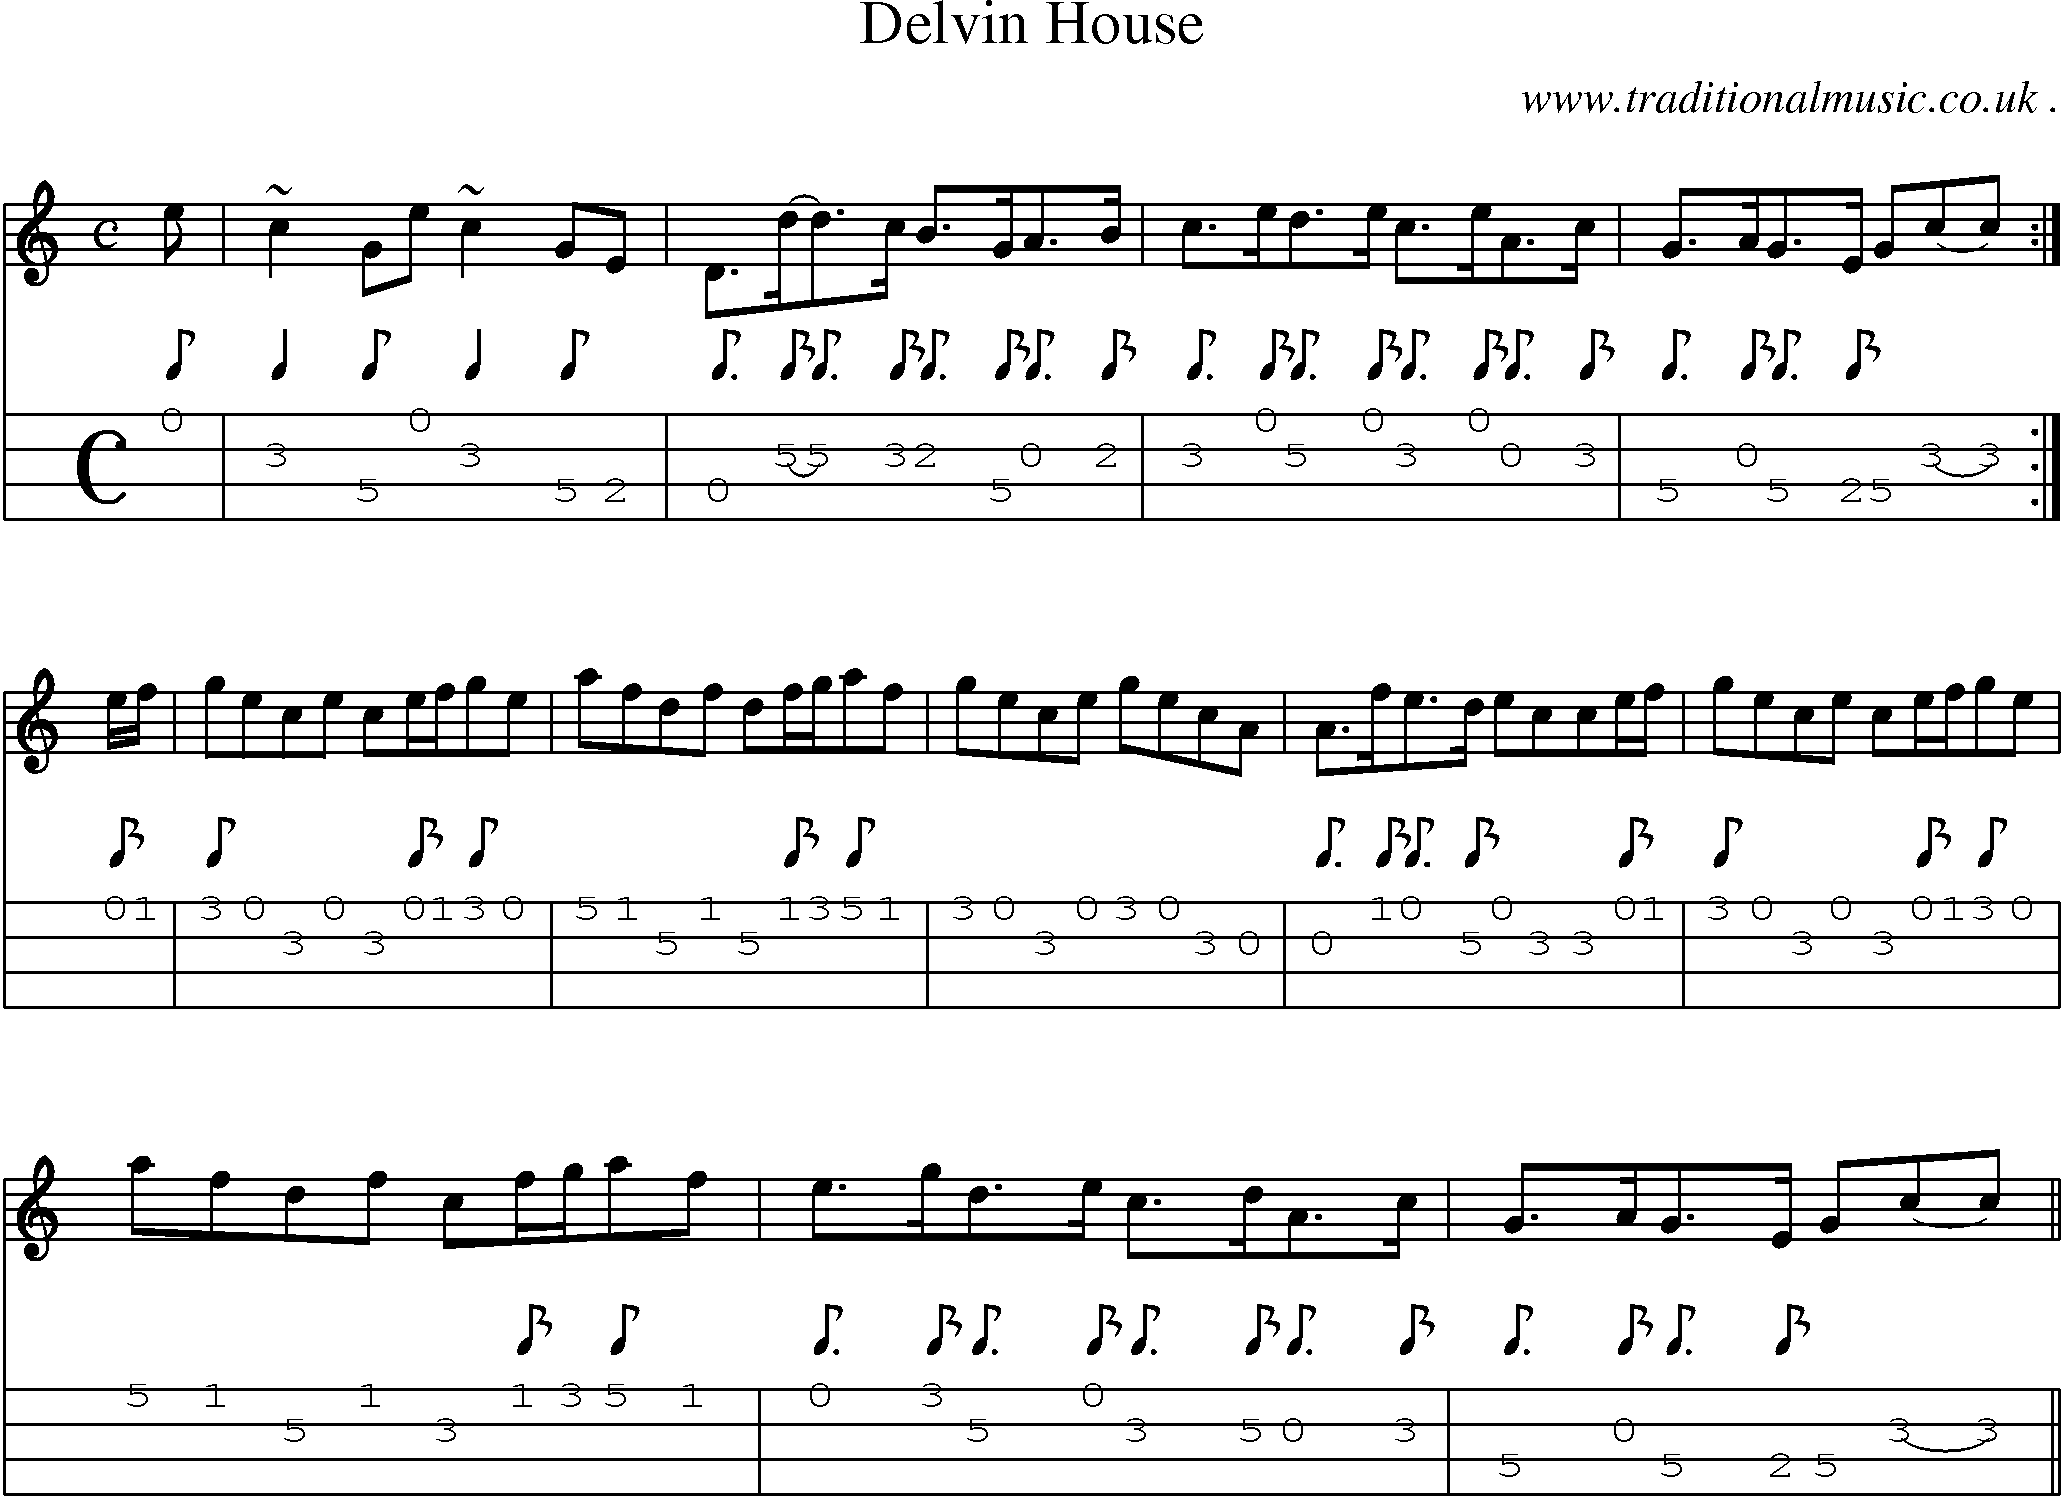 Sheet-music  score, Chords and Mandolin Tabs for Delvin House